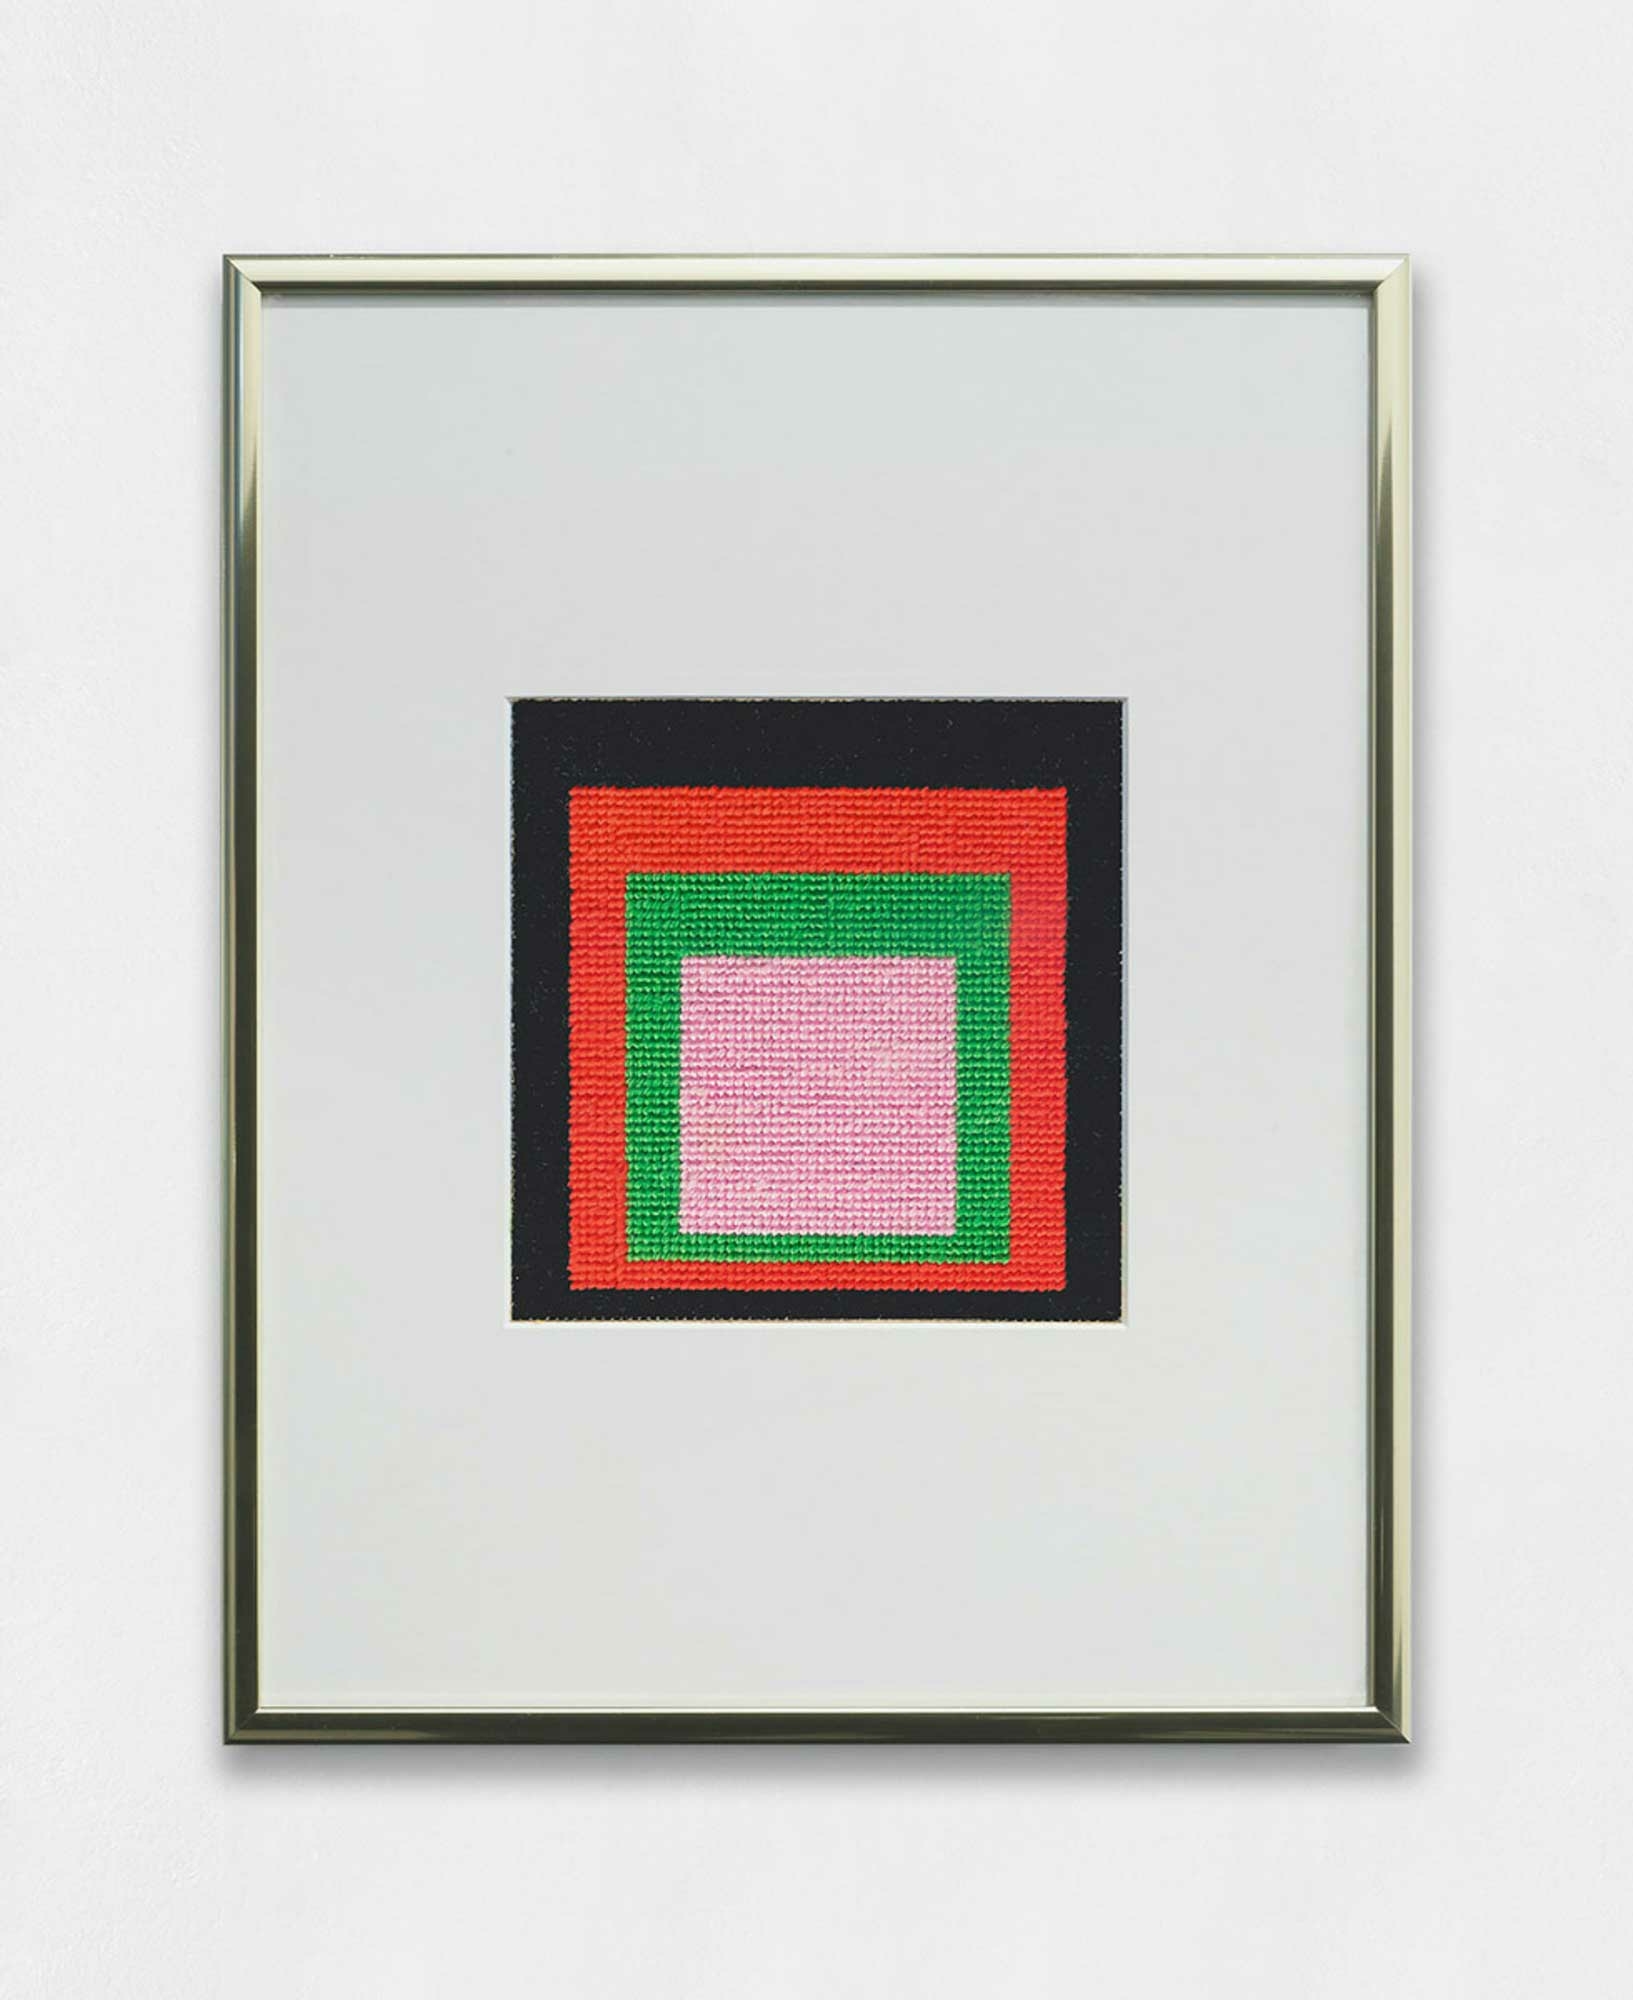 Homage to Josef Albers’s ‘Homage to the Square’ (Sympathy for the Devil)